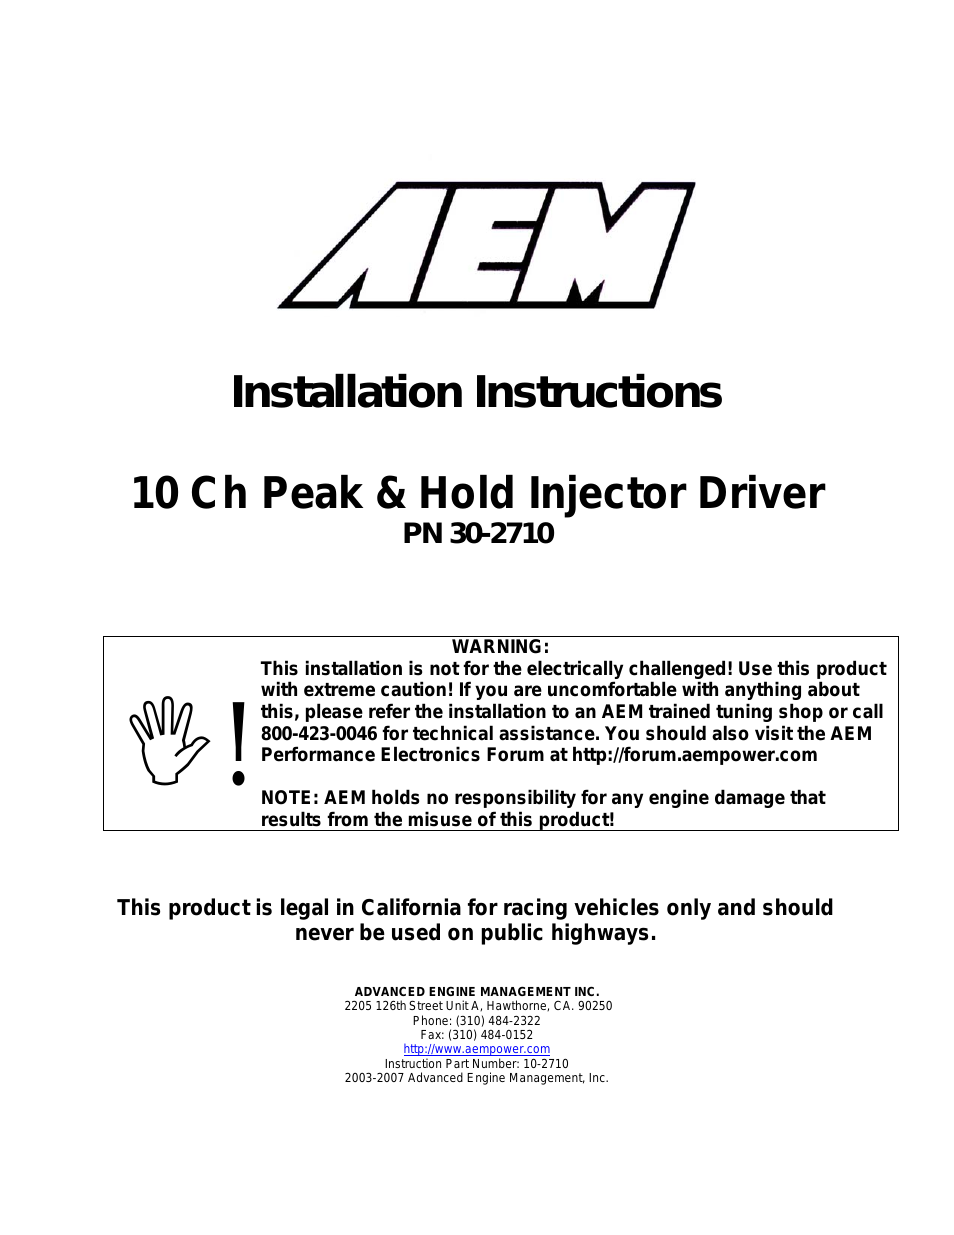 30-2710 Peak & Hold Injector Driver 10 Channel